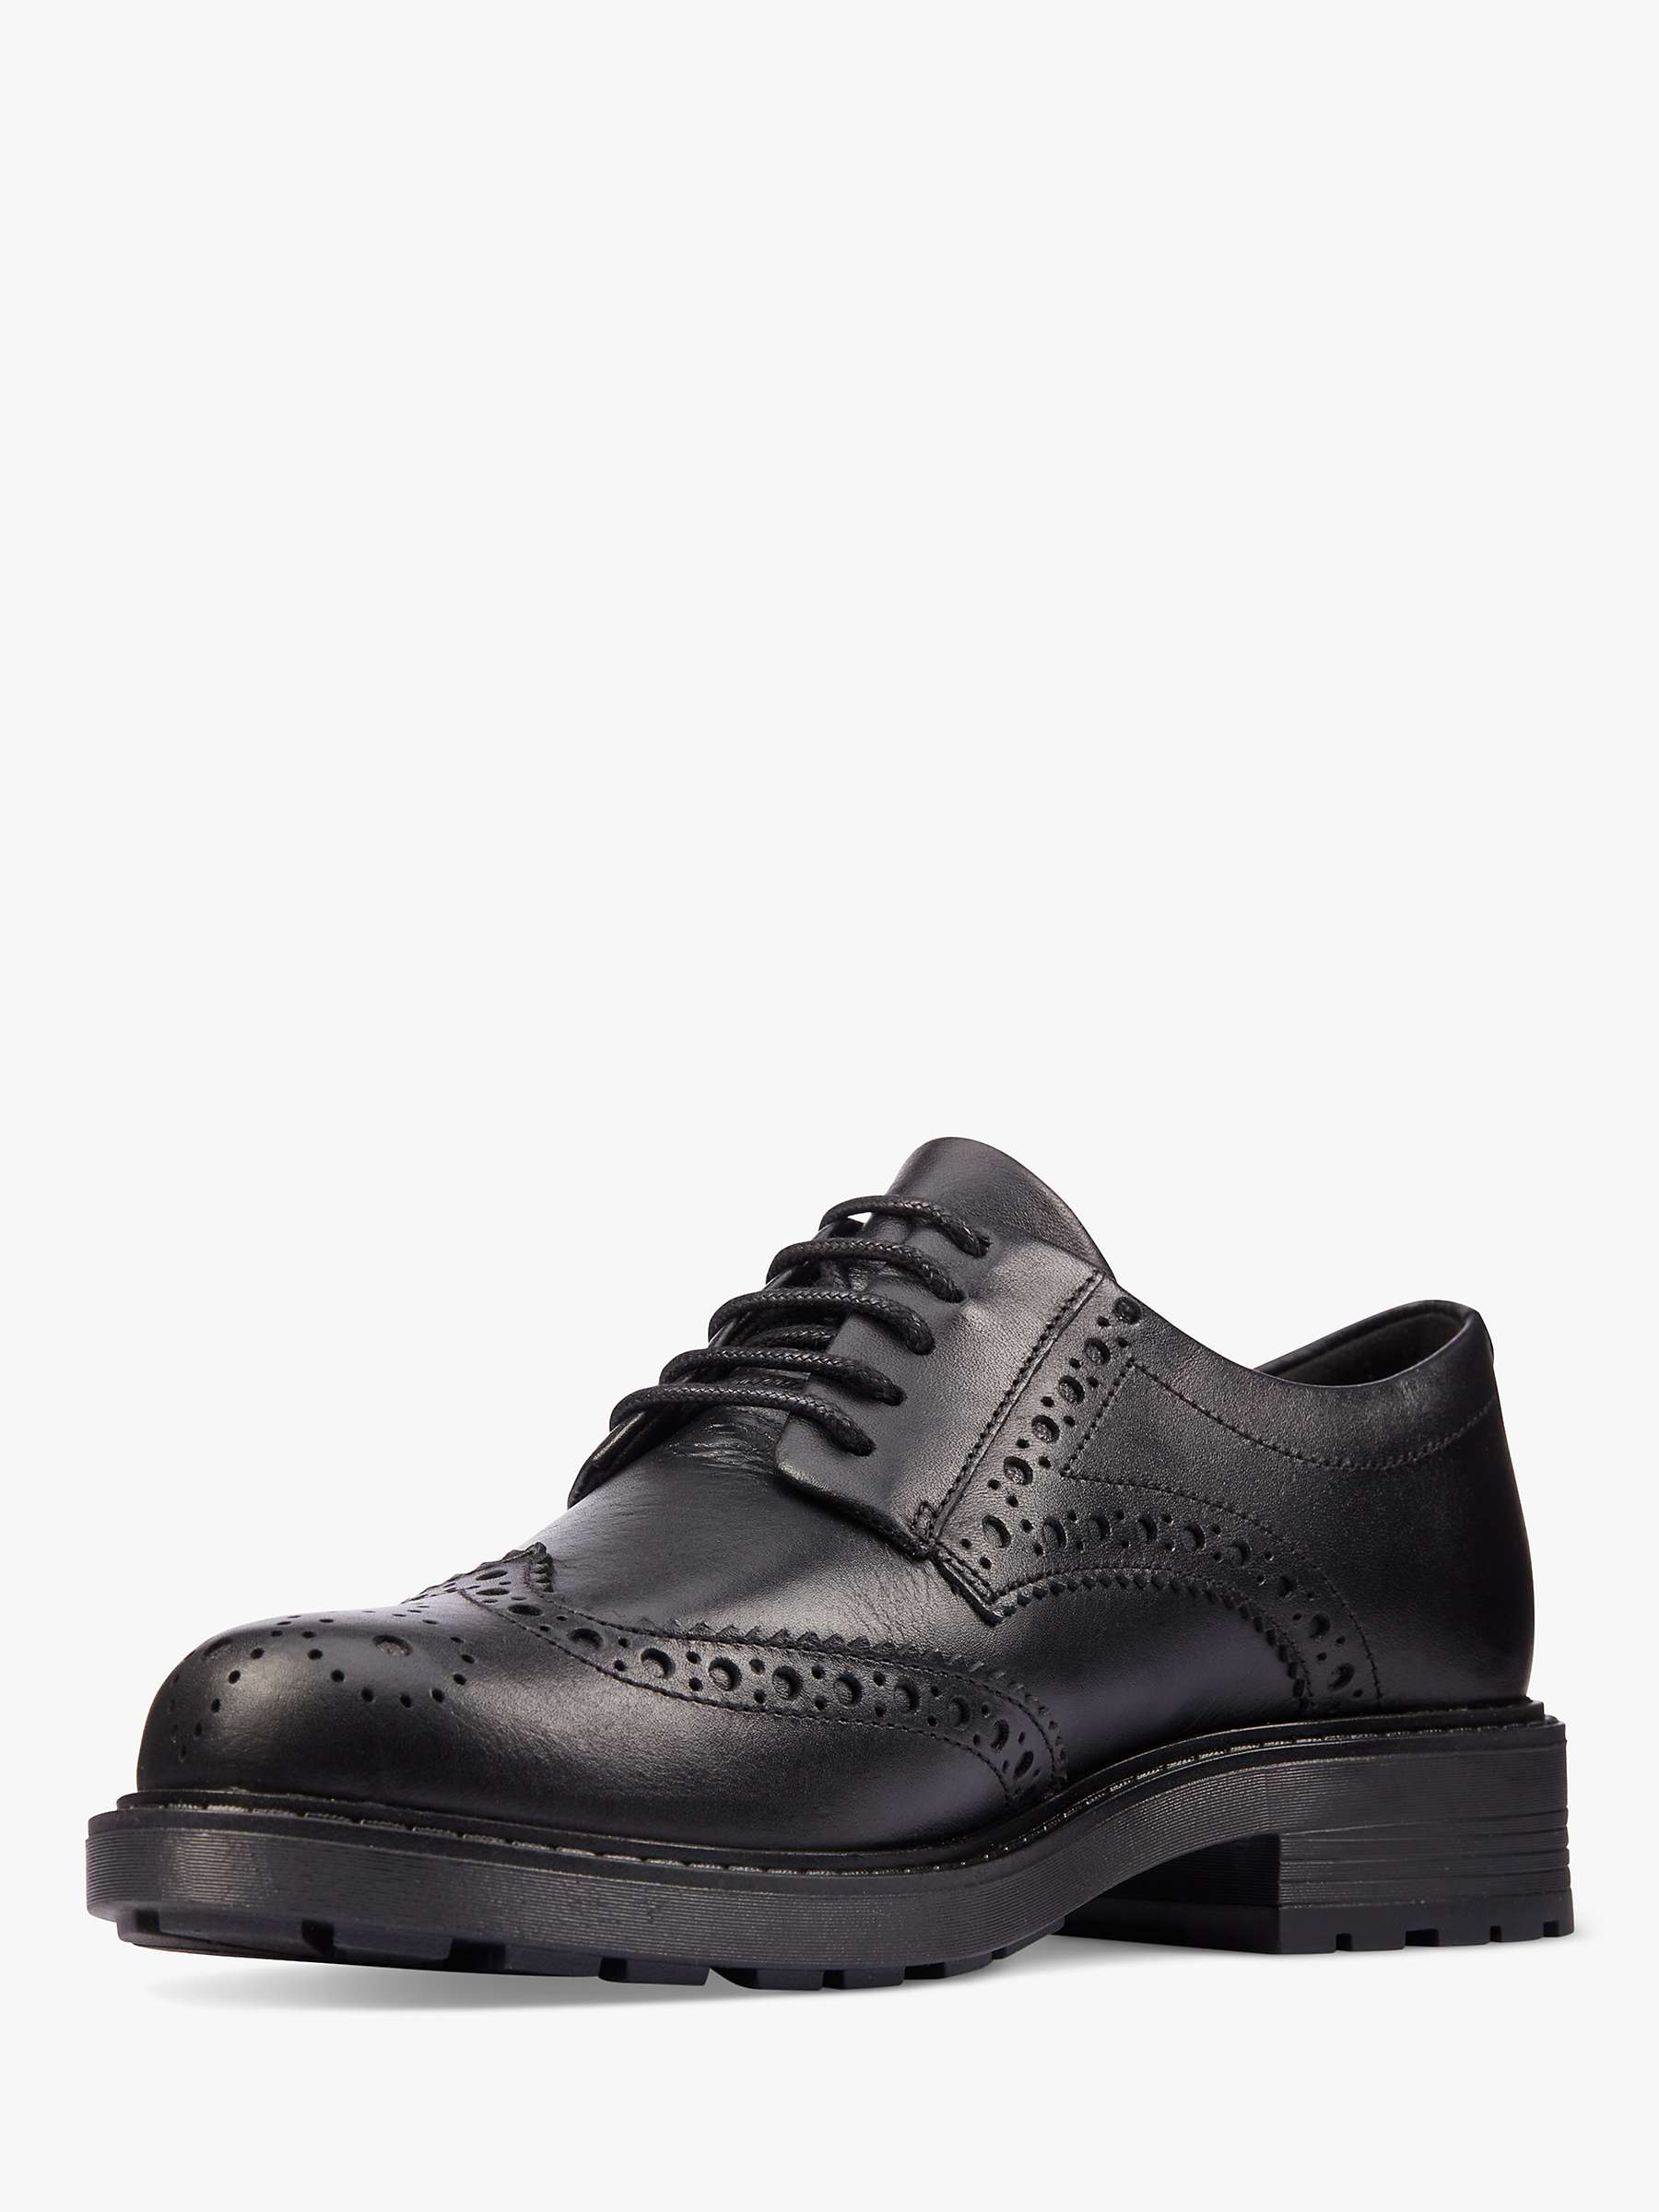 Buy Clarks Orinoco 2 Limit Leather Brogues, Black Online at johnlewis.com